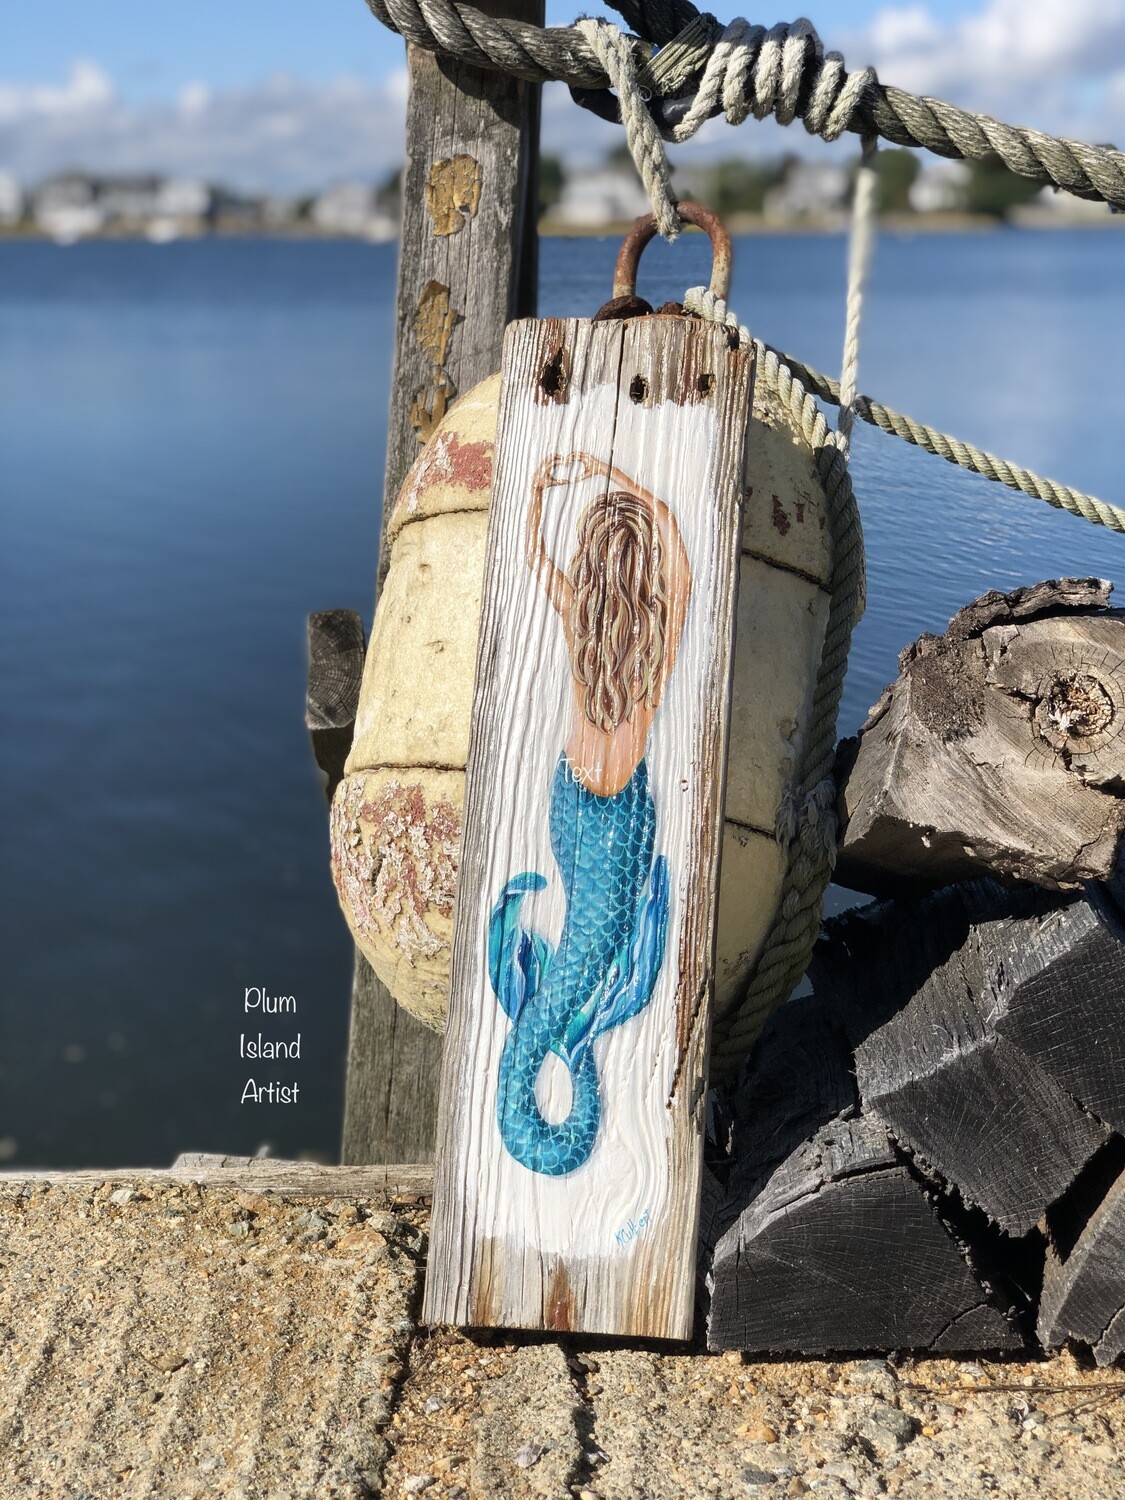 Heart Hands Mermaid Painted on Driftwood #3